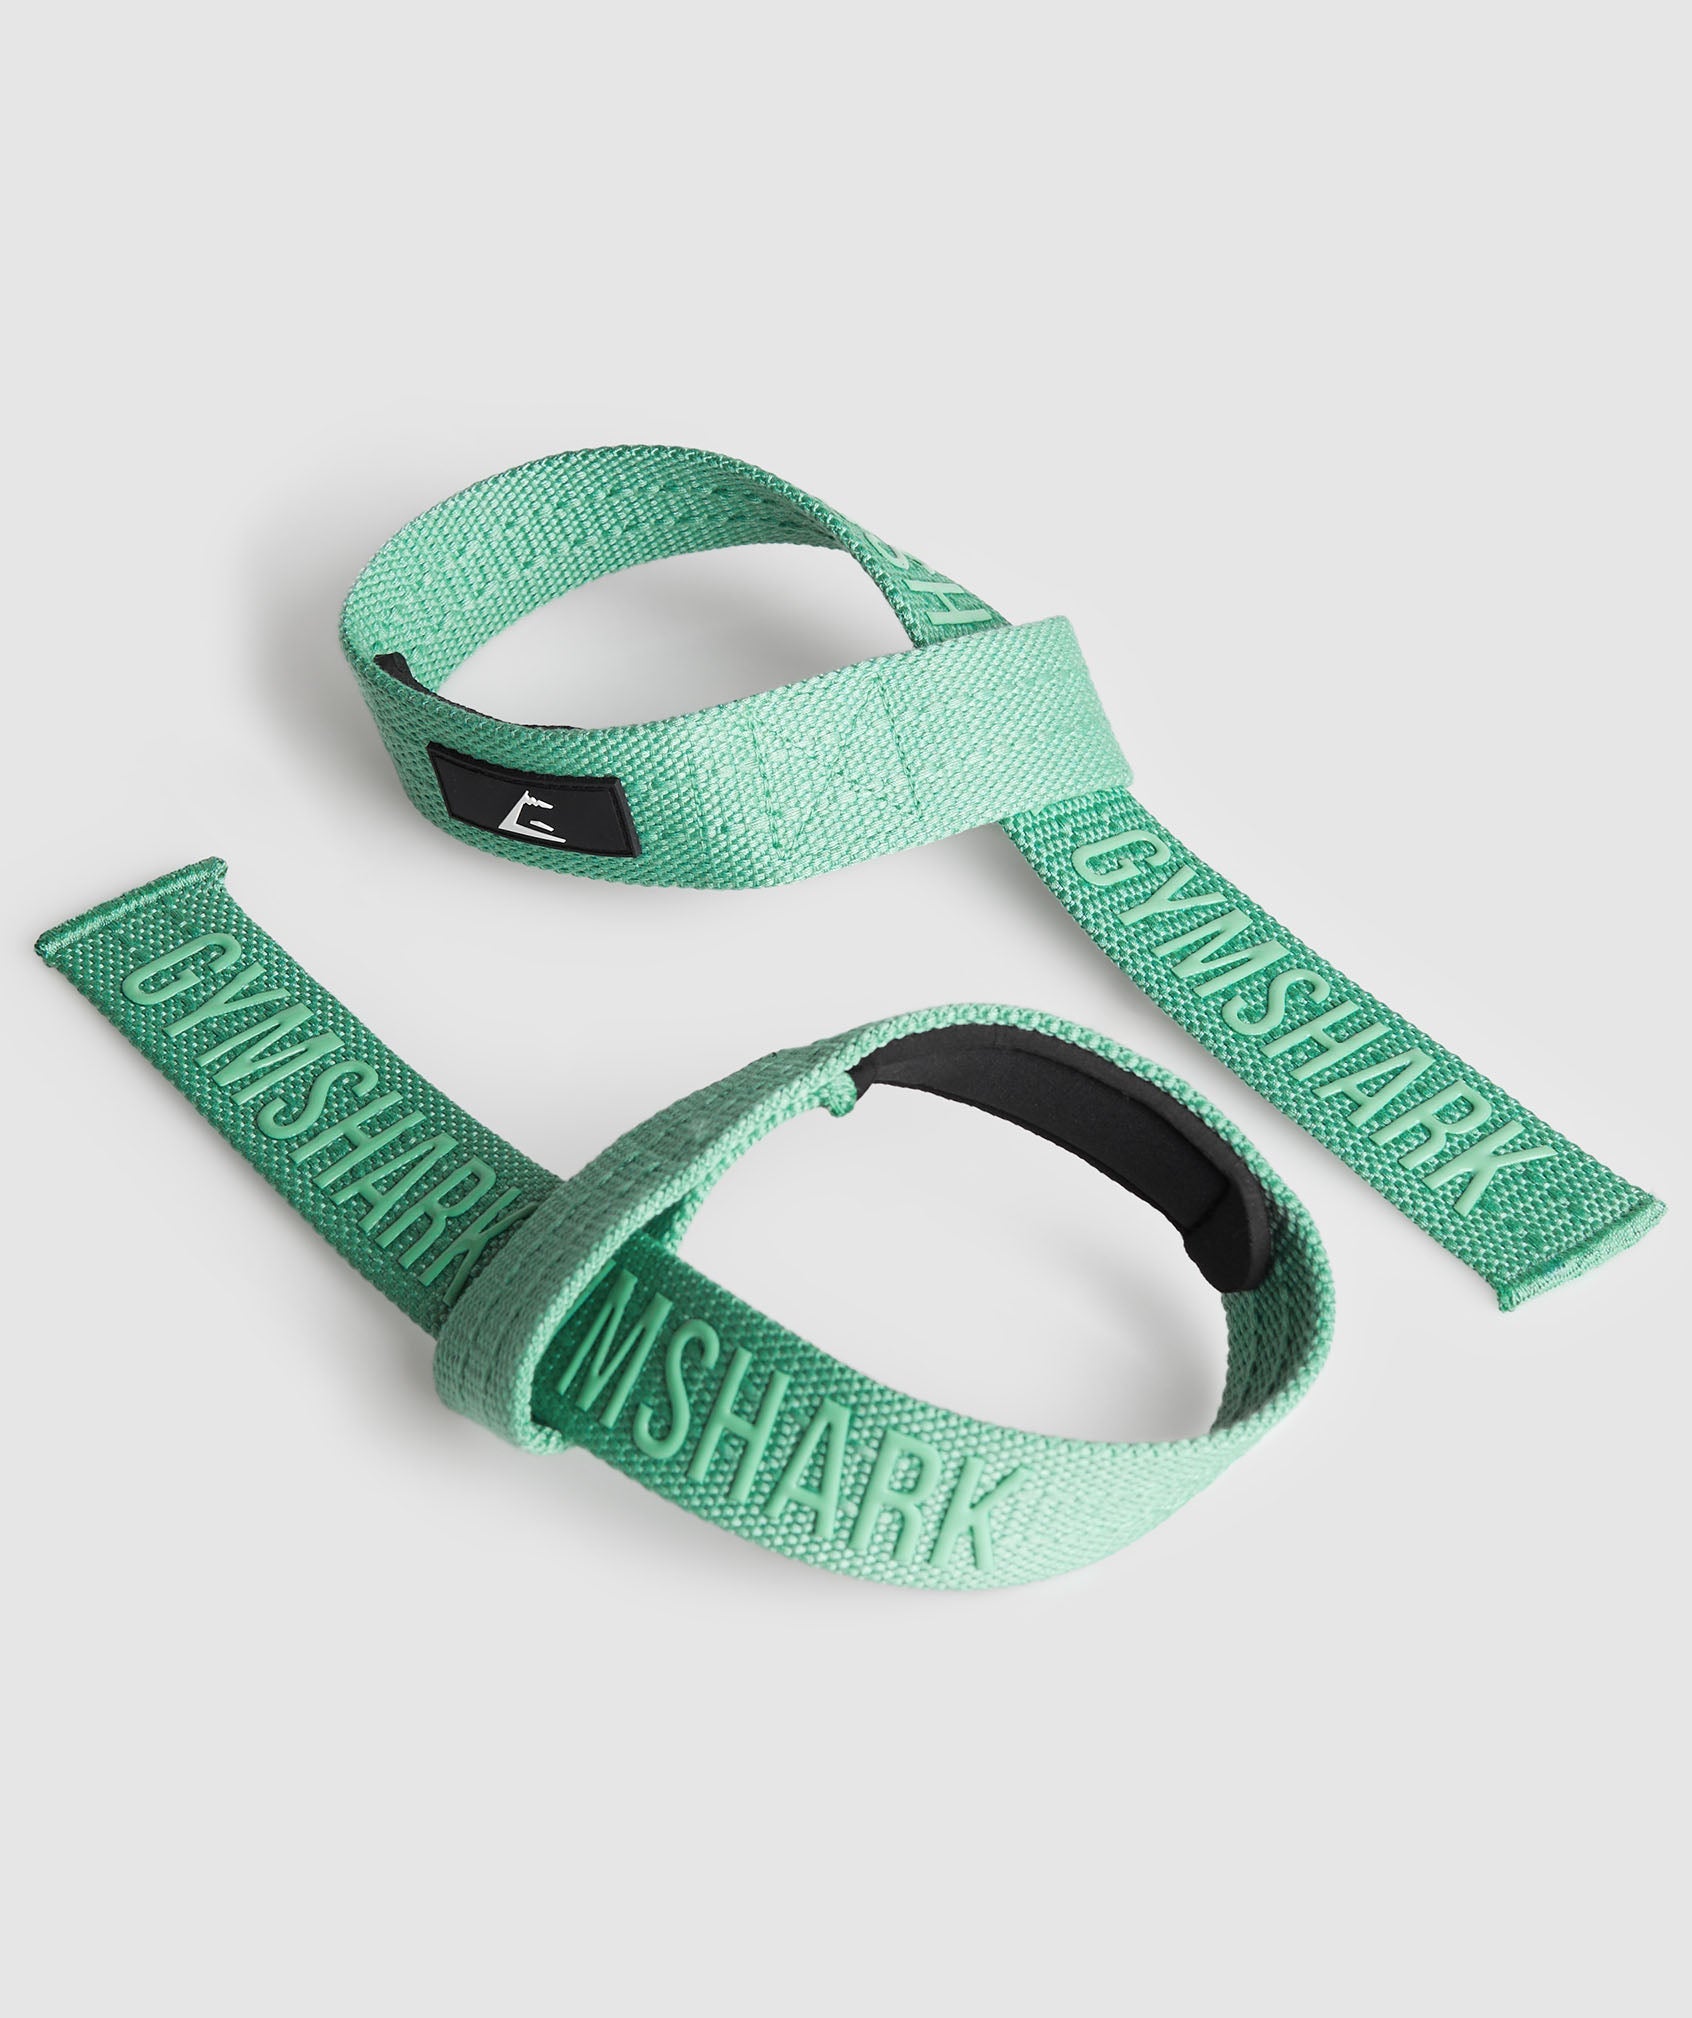 Silicone Grip Lifting Straps in Lagoon Green